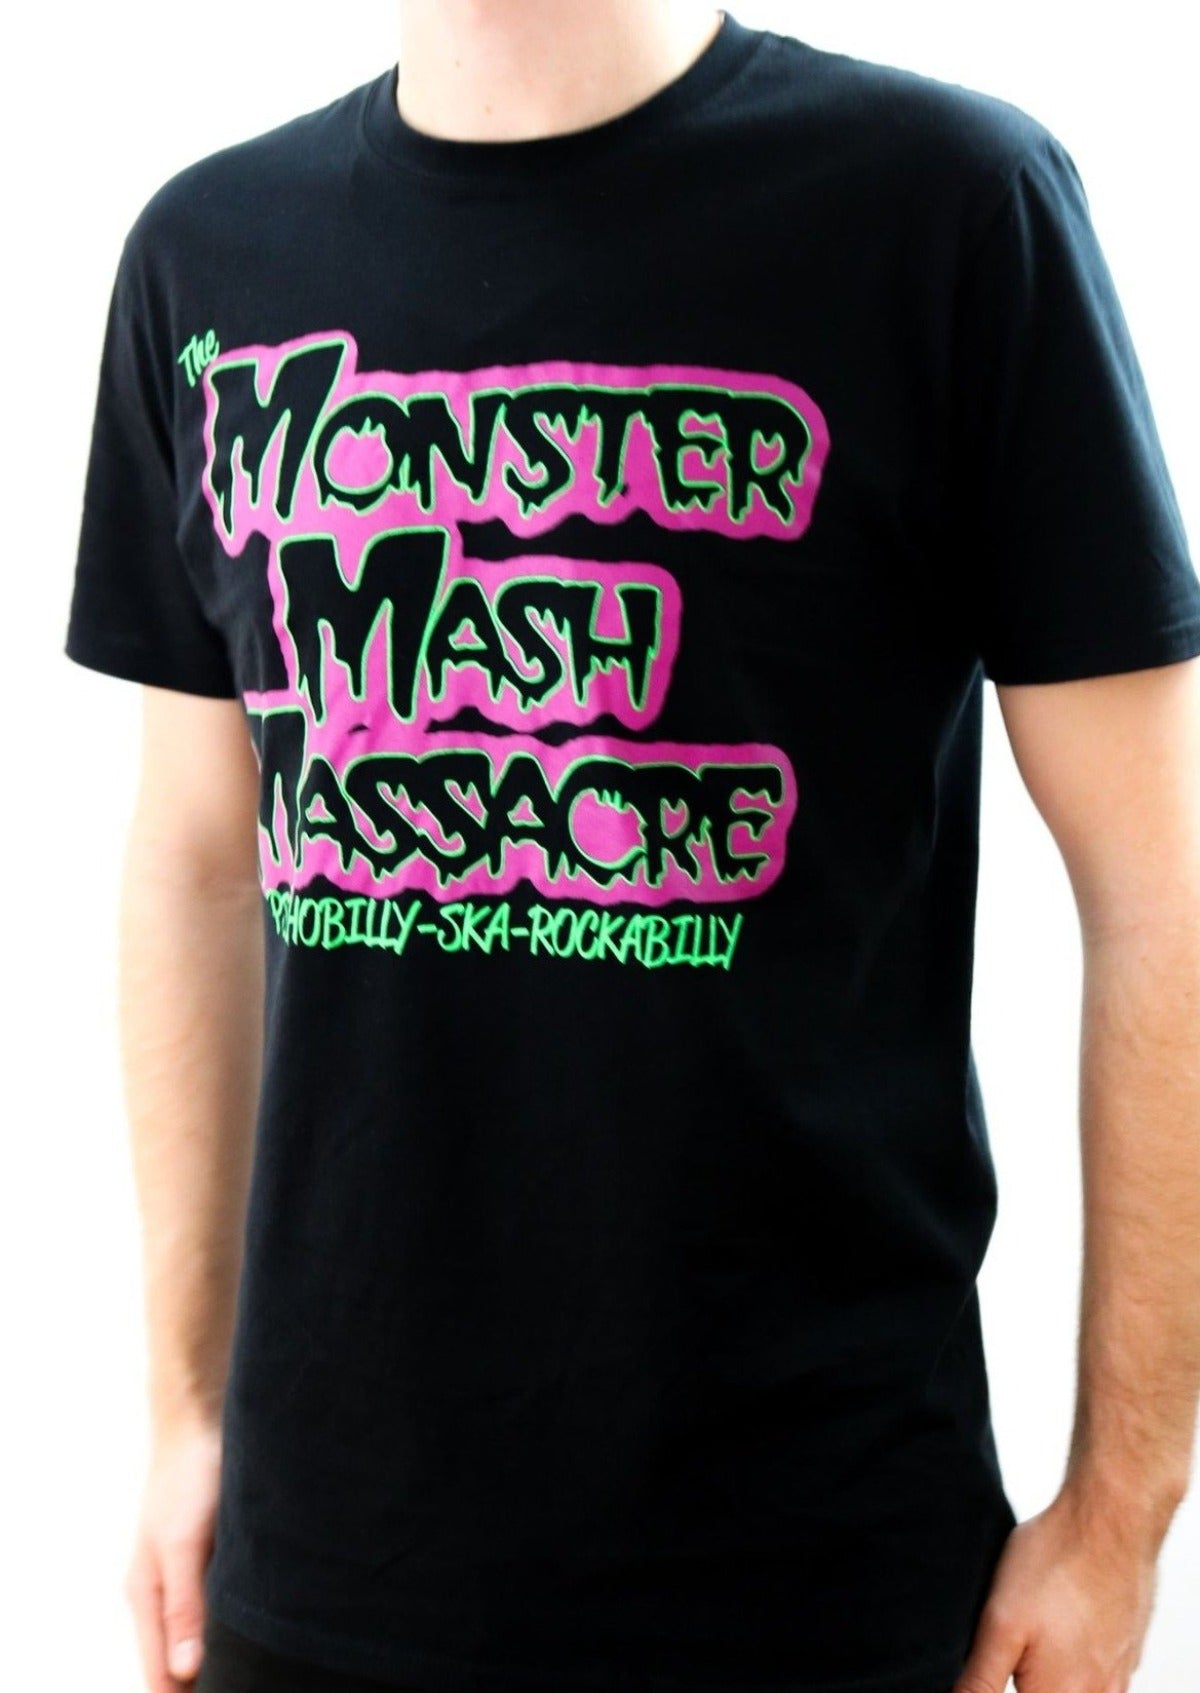 Unisex "Monster Mash Massacre- Psychobilly, Ska, Rockabilly" Tee in black. Now available from Rockabilly Australia in sizes Small to Extra Large!